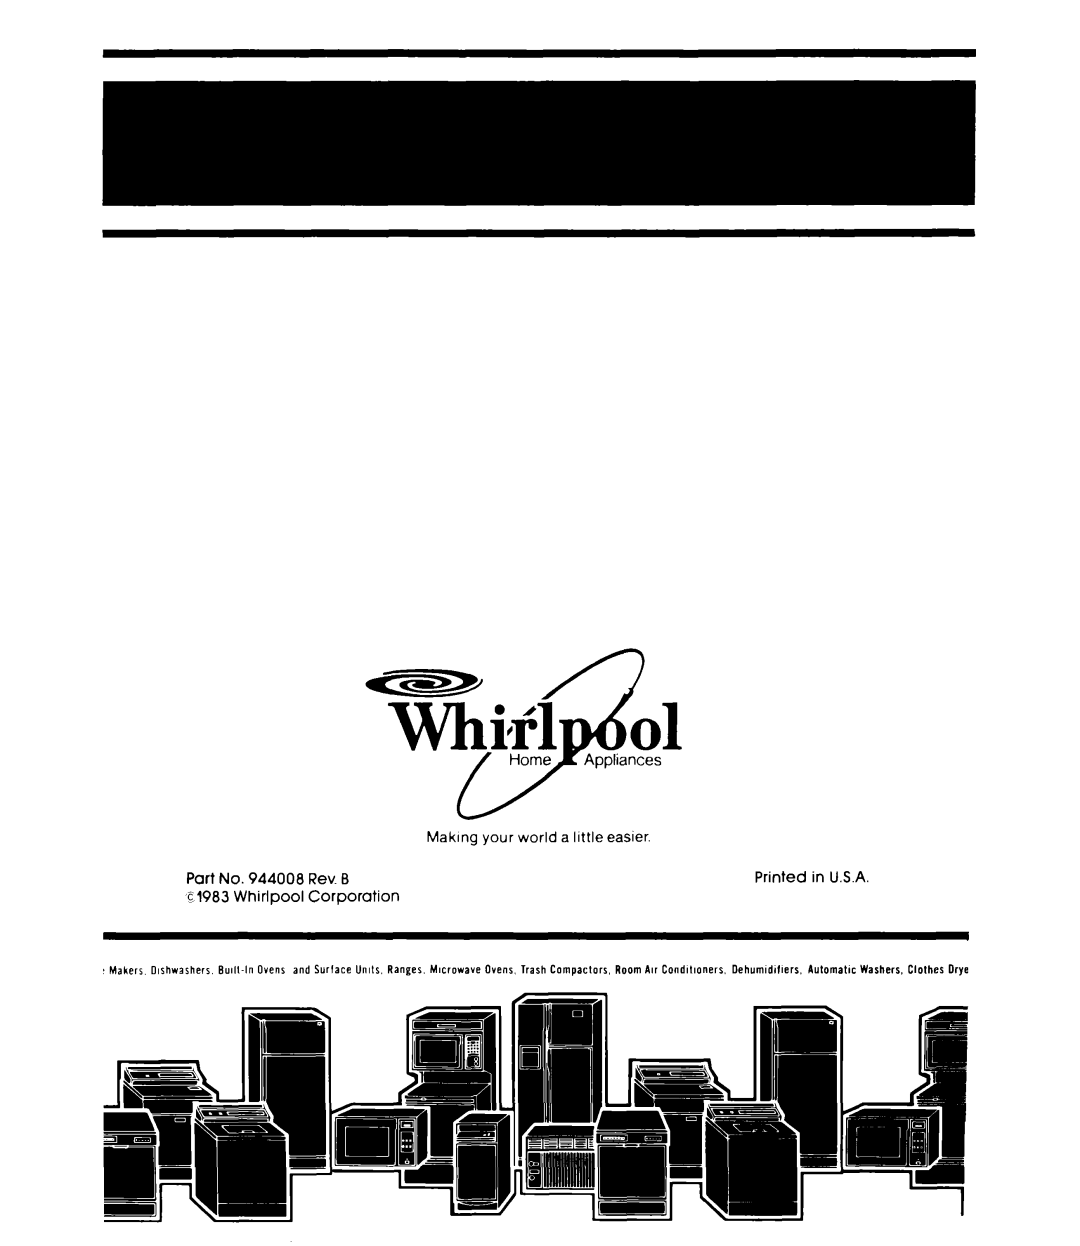 Whirlpool ED22MM manual Making your world a little easier, Rev, ‘cl983 Whirlpool, Corporation 